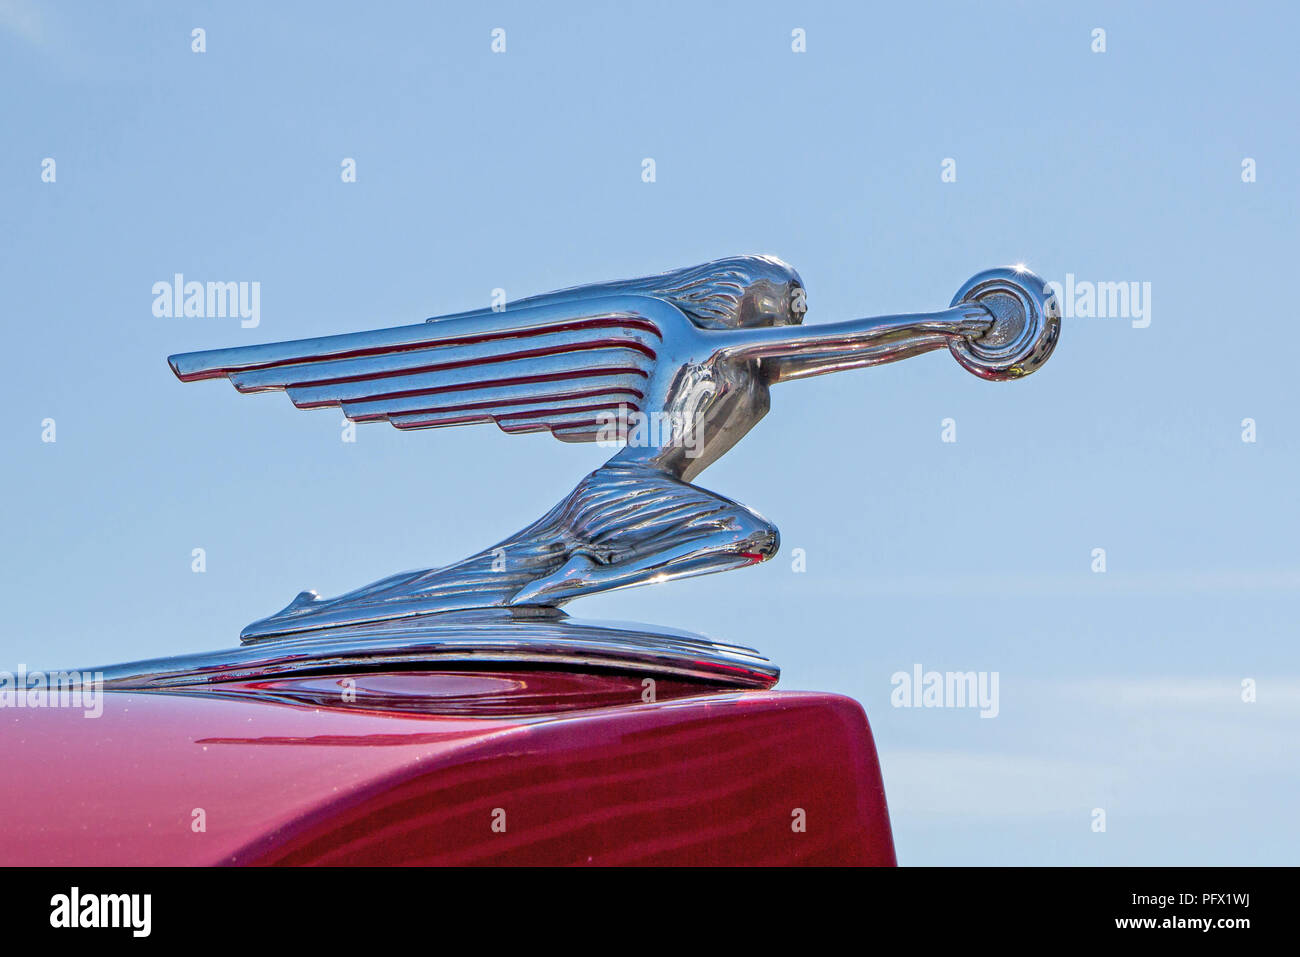 CONCORD, NC - April 5, 2018: Closeup of a 1937 Packard hood ornament on display at the Pennzoil AutoFair Classic Car Show at Charlotte Motor Speedway. Stock Photo